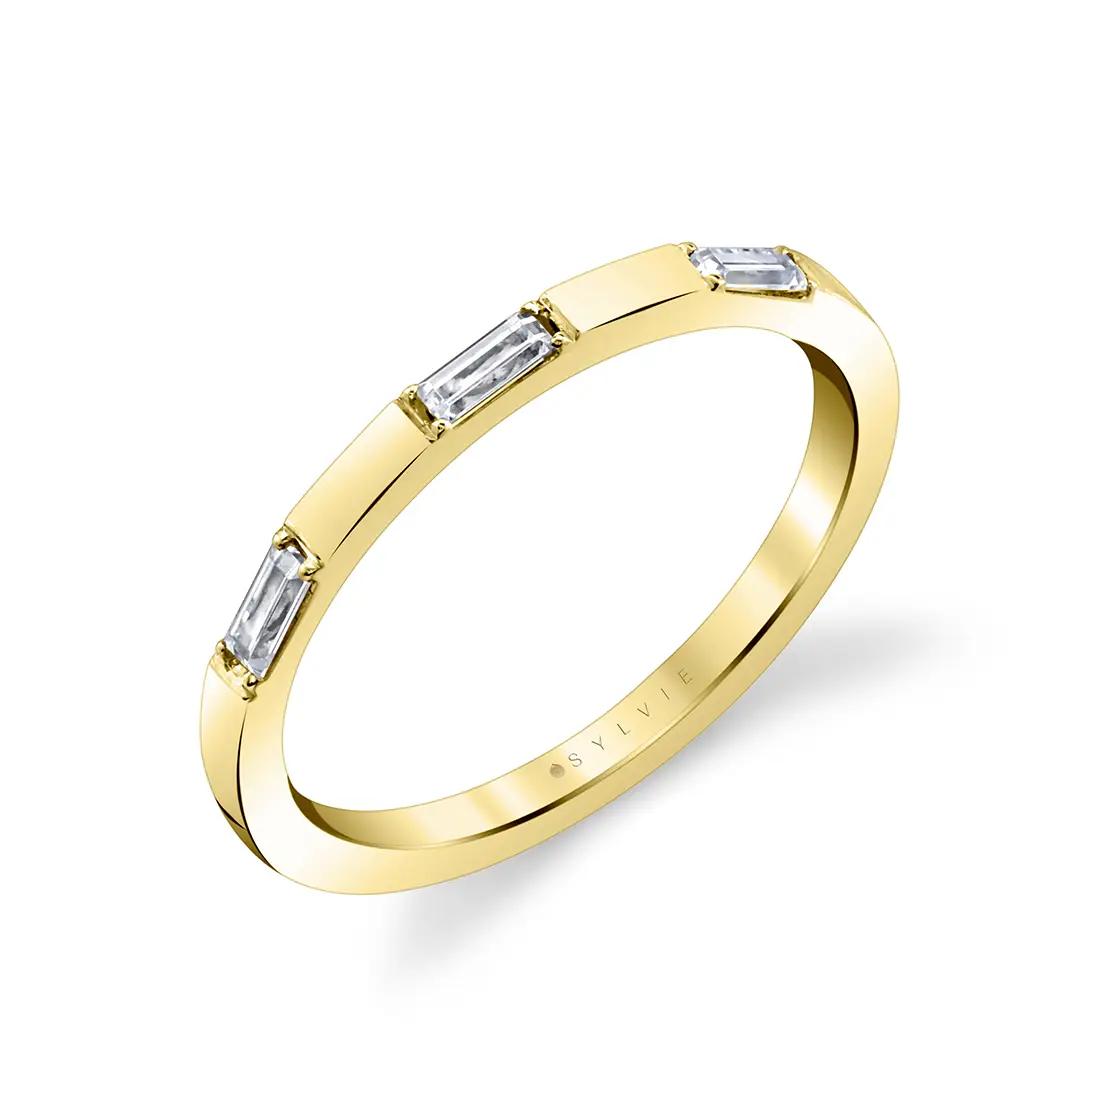 modern baguette wedding band in yellow gold